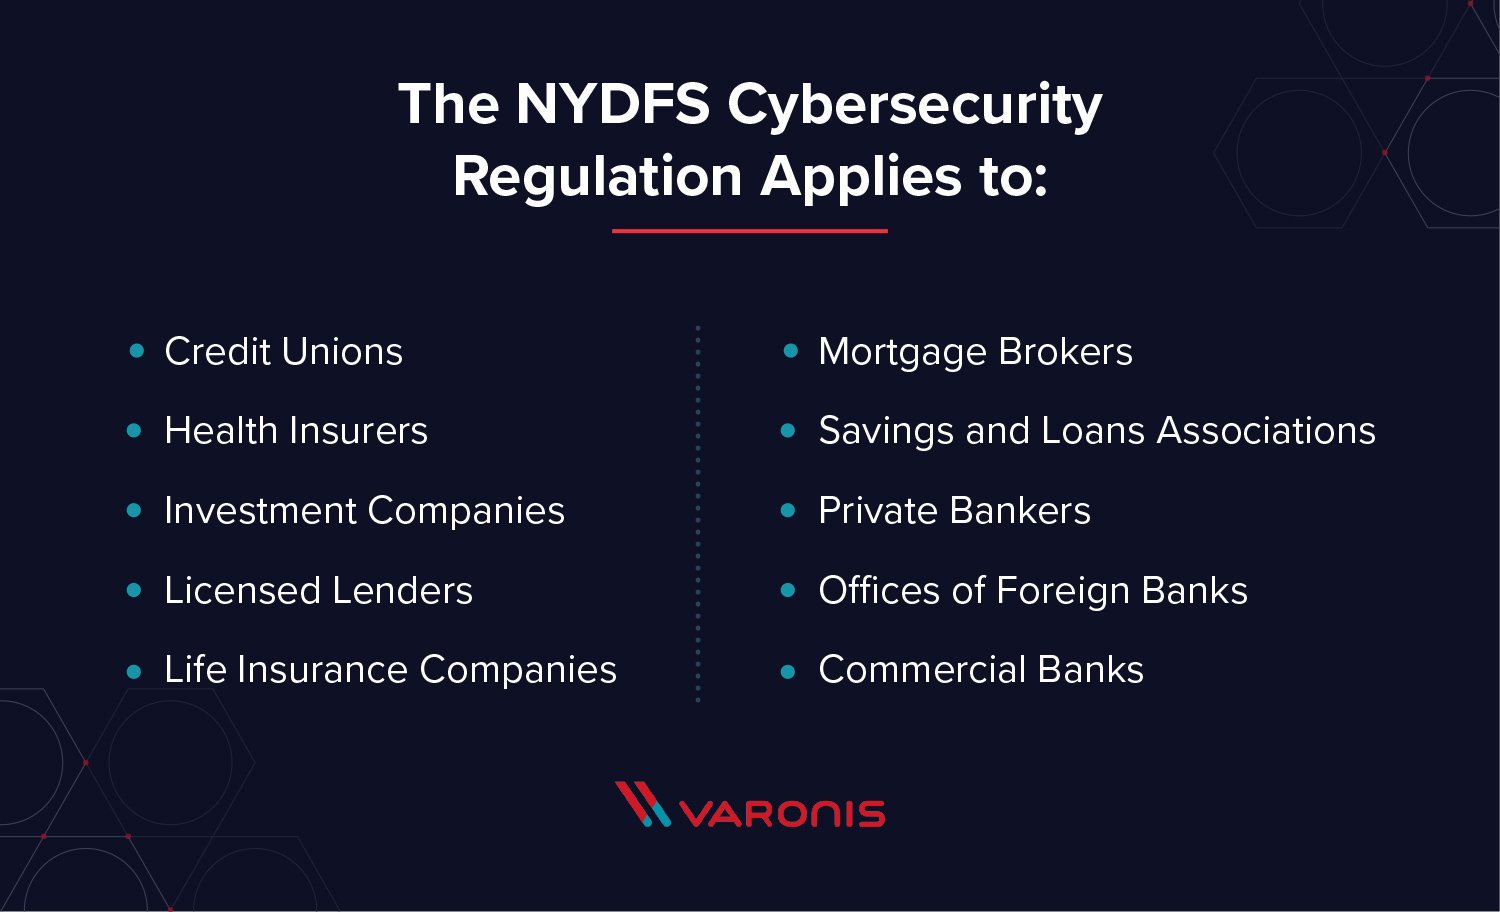 list of who the nydfs cybersecurity regulation applies to